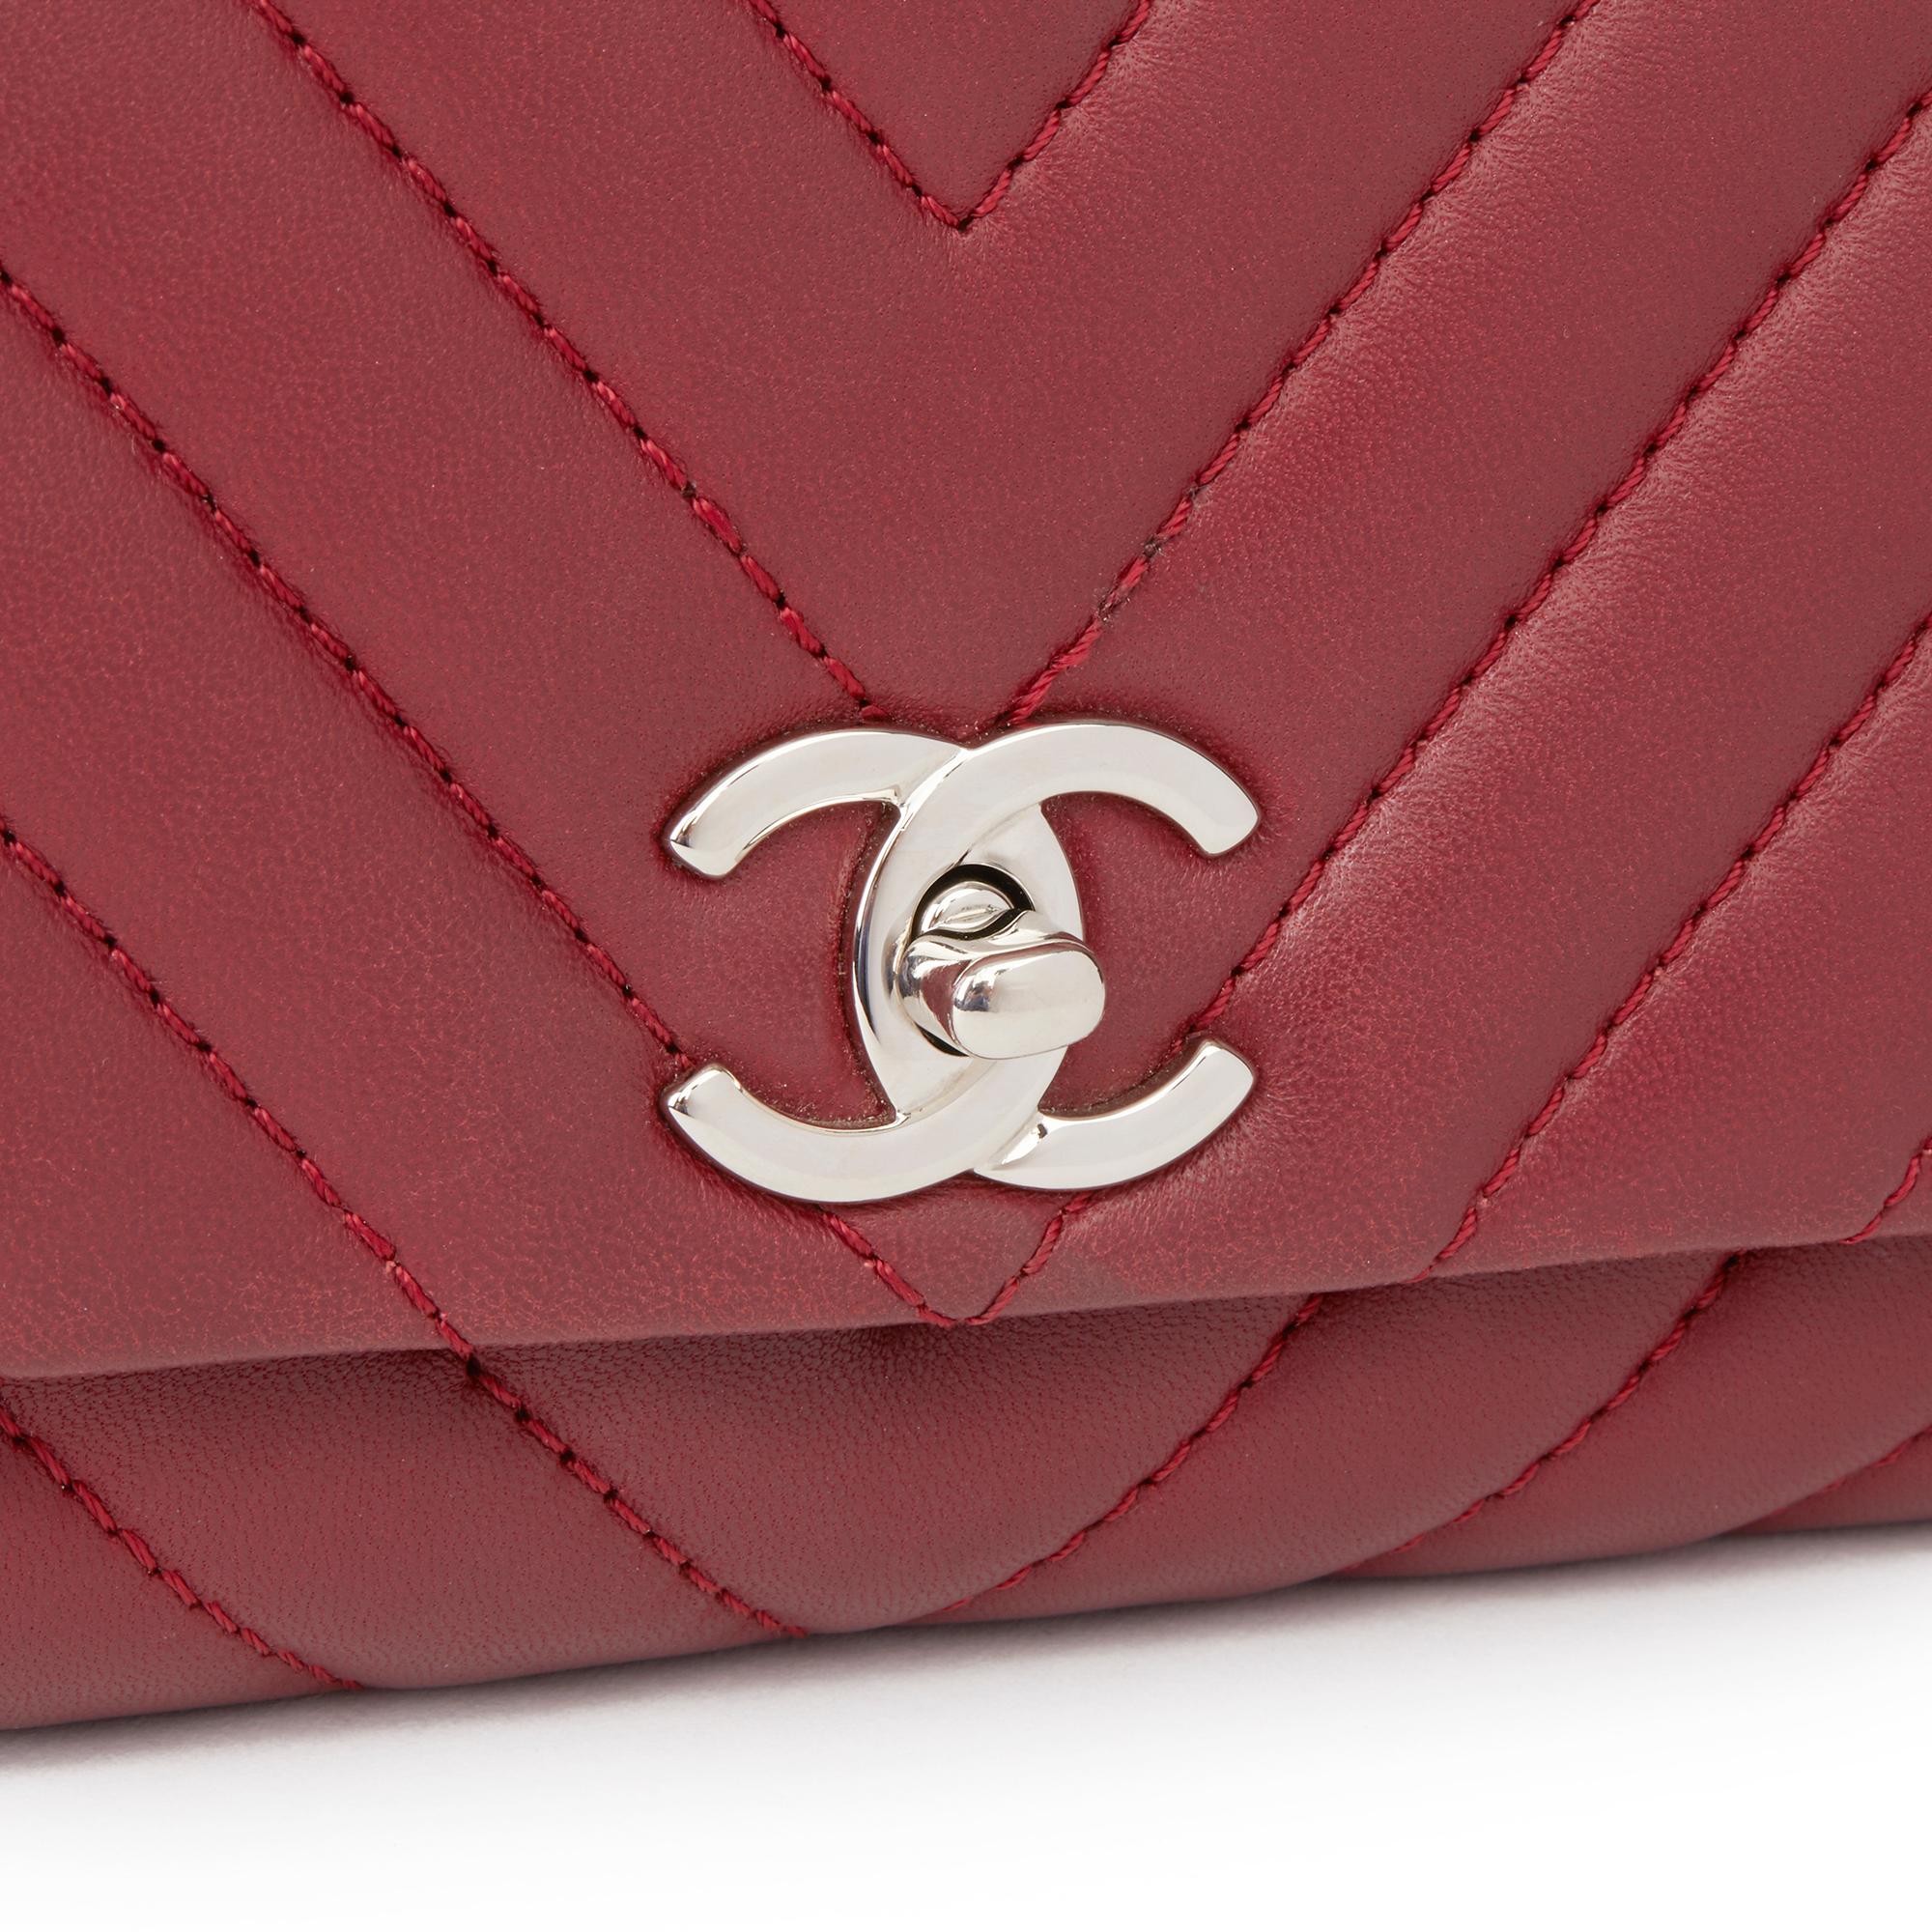 2013 Chanel Burgundy Chevron Quilted Lambskin Classic Single Flap Bag 2